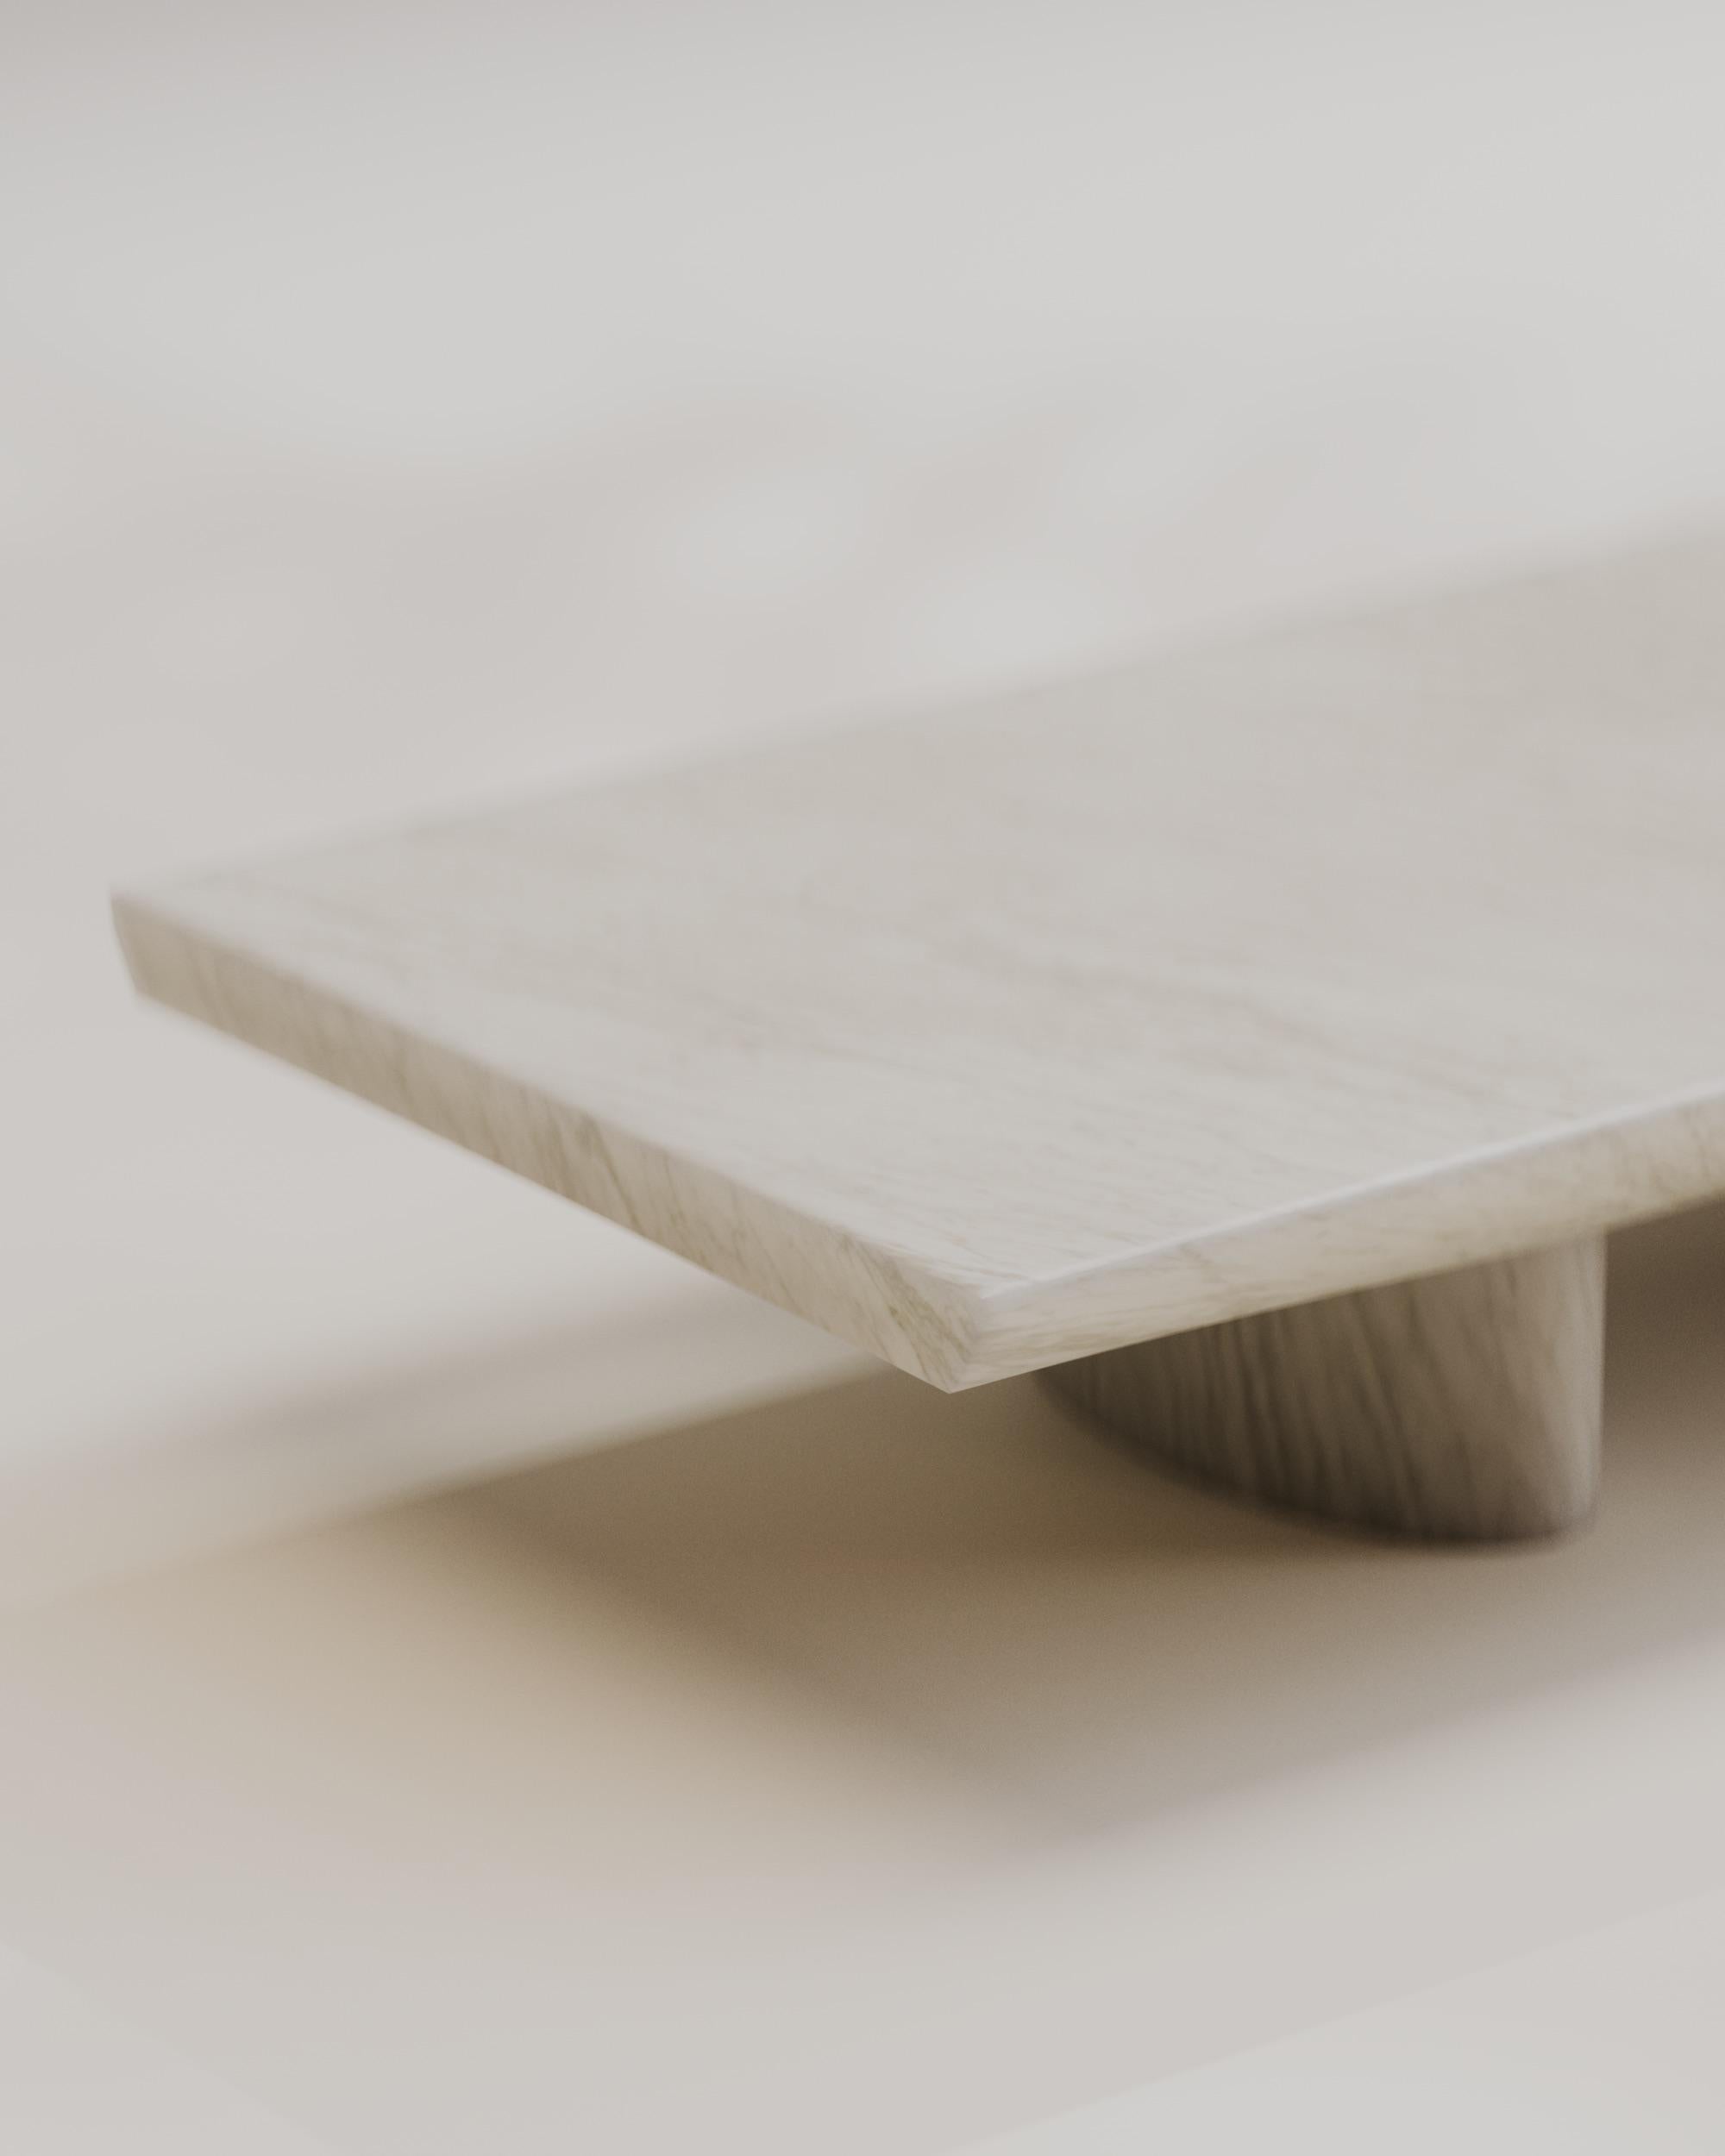 Hand-Crafted Solid White Marble Abraccio Rectangular Coffee Table 140 by Studio Narra For Sale